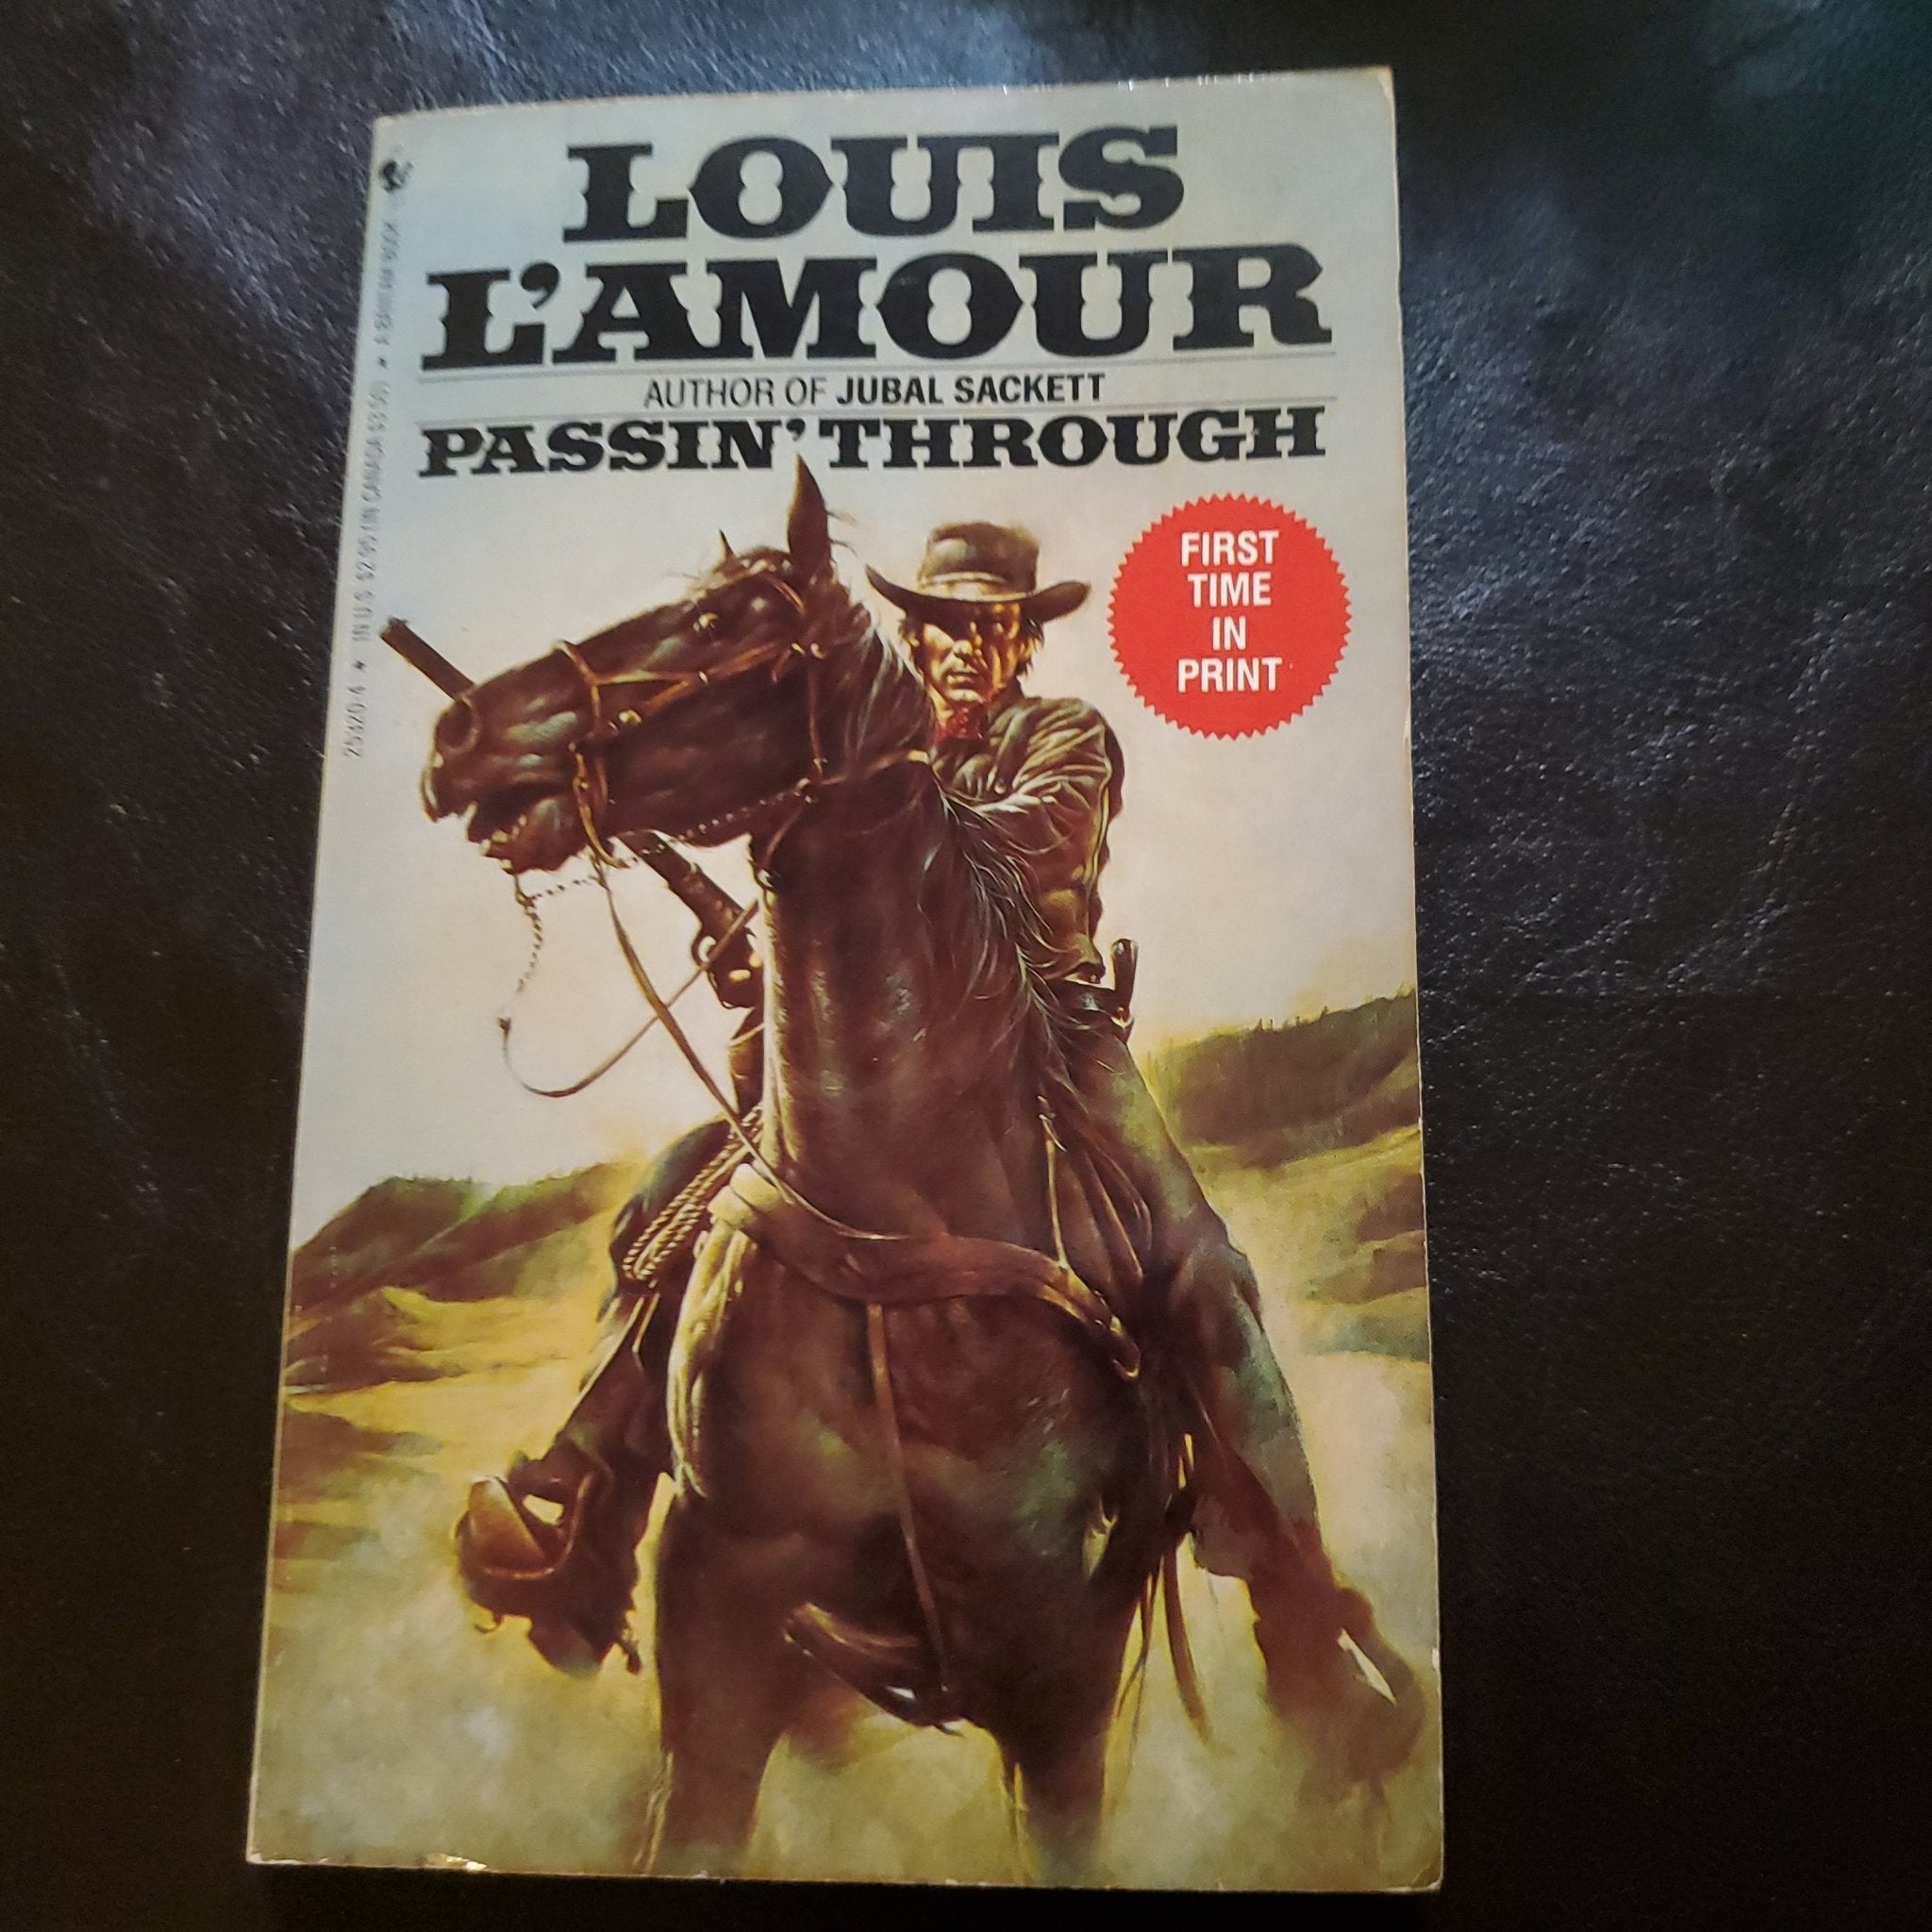 Passin Through (The Louis L'amour Collection)